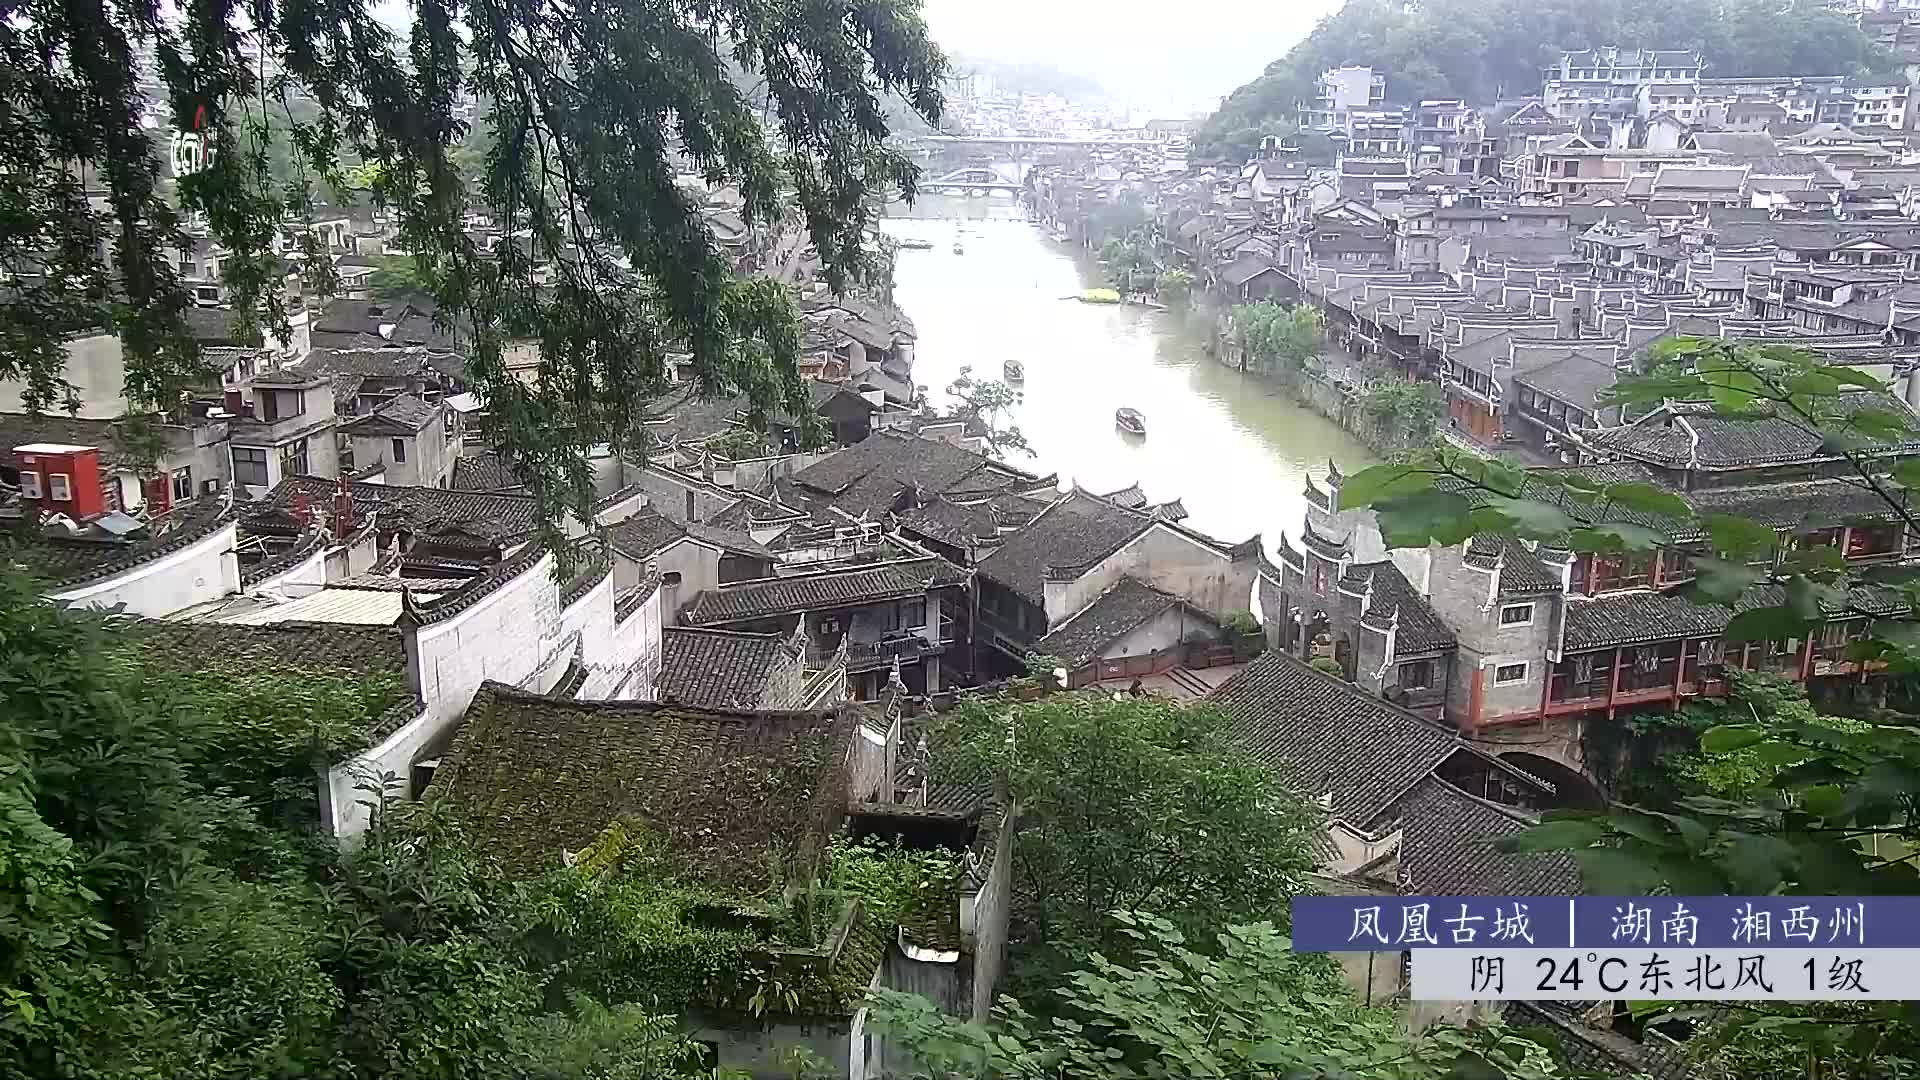 Fenghuang Dom. 09:48